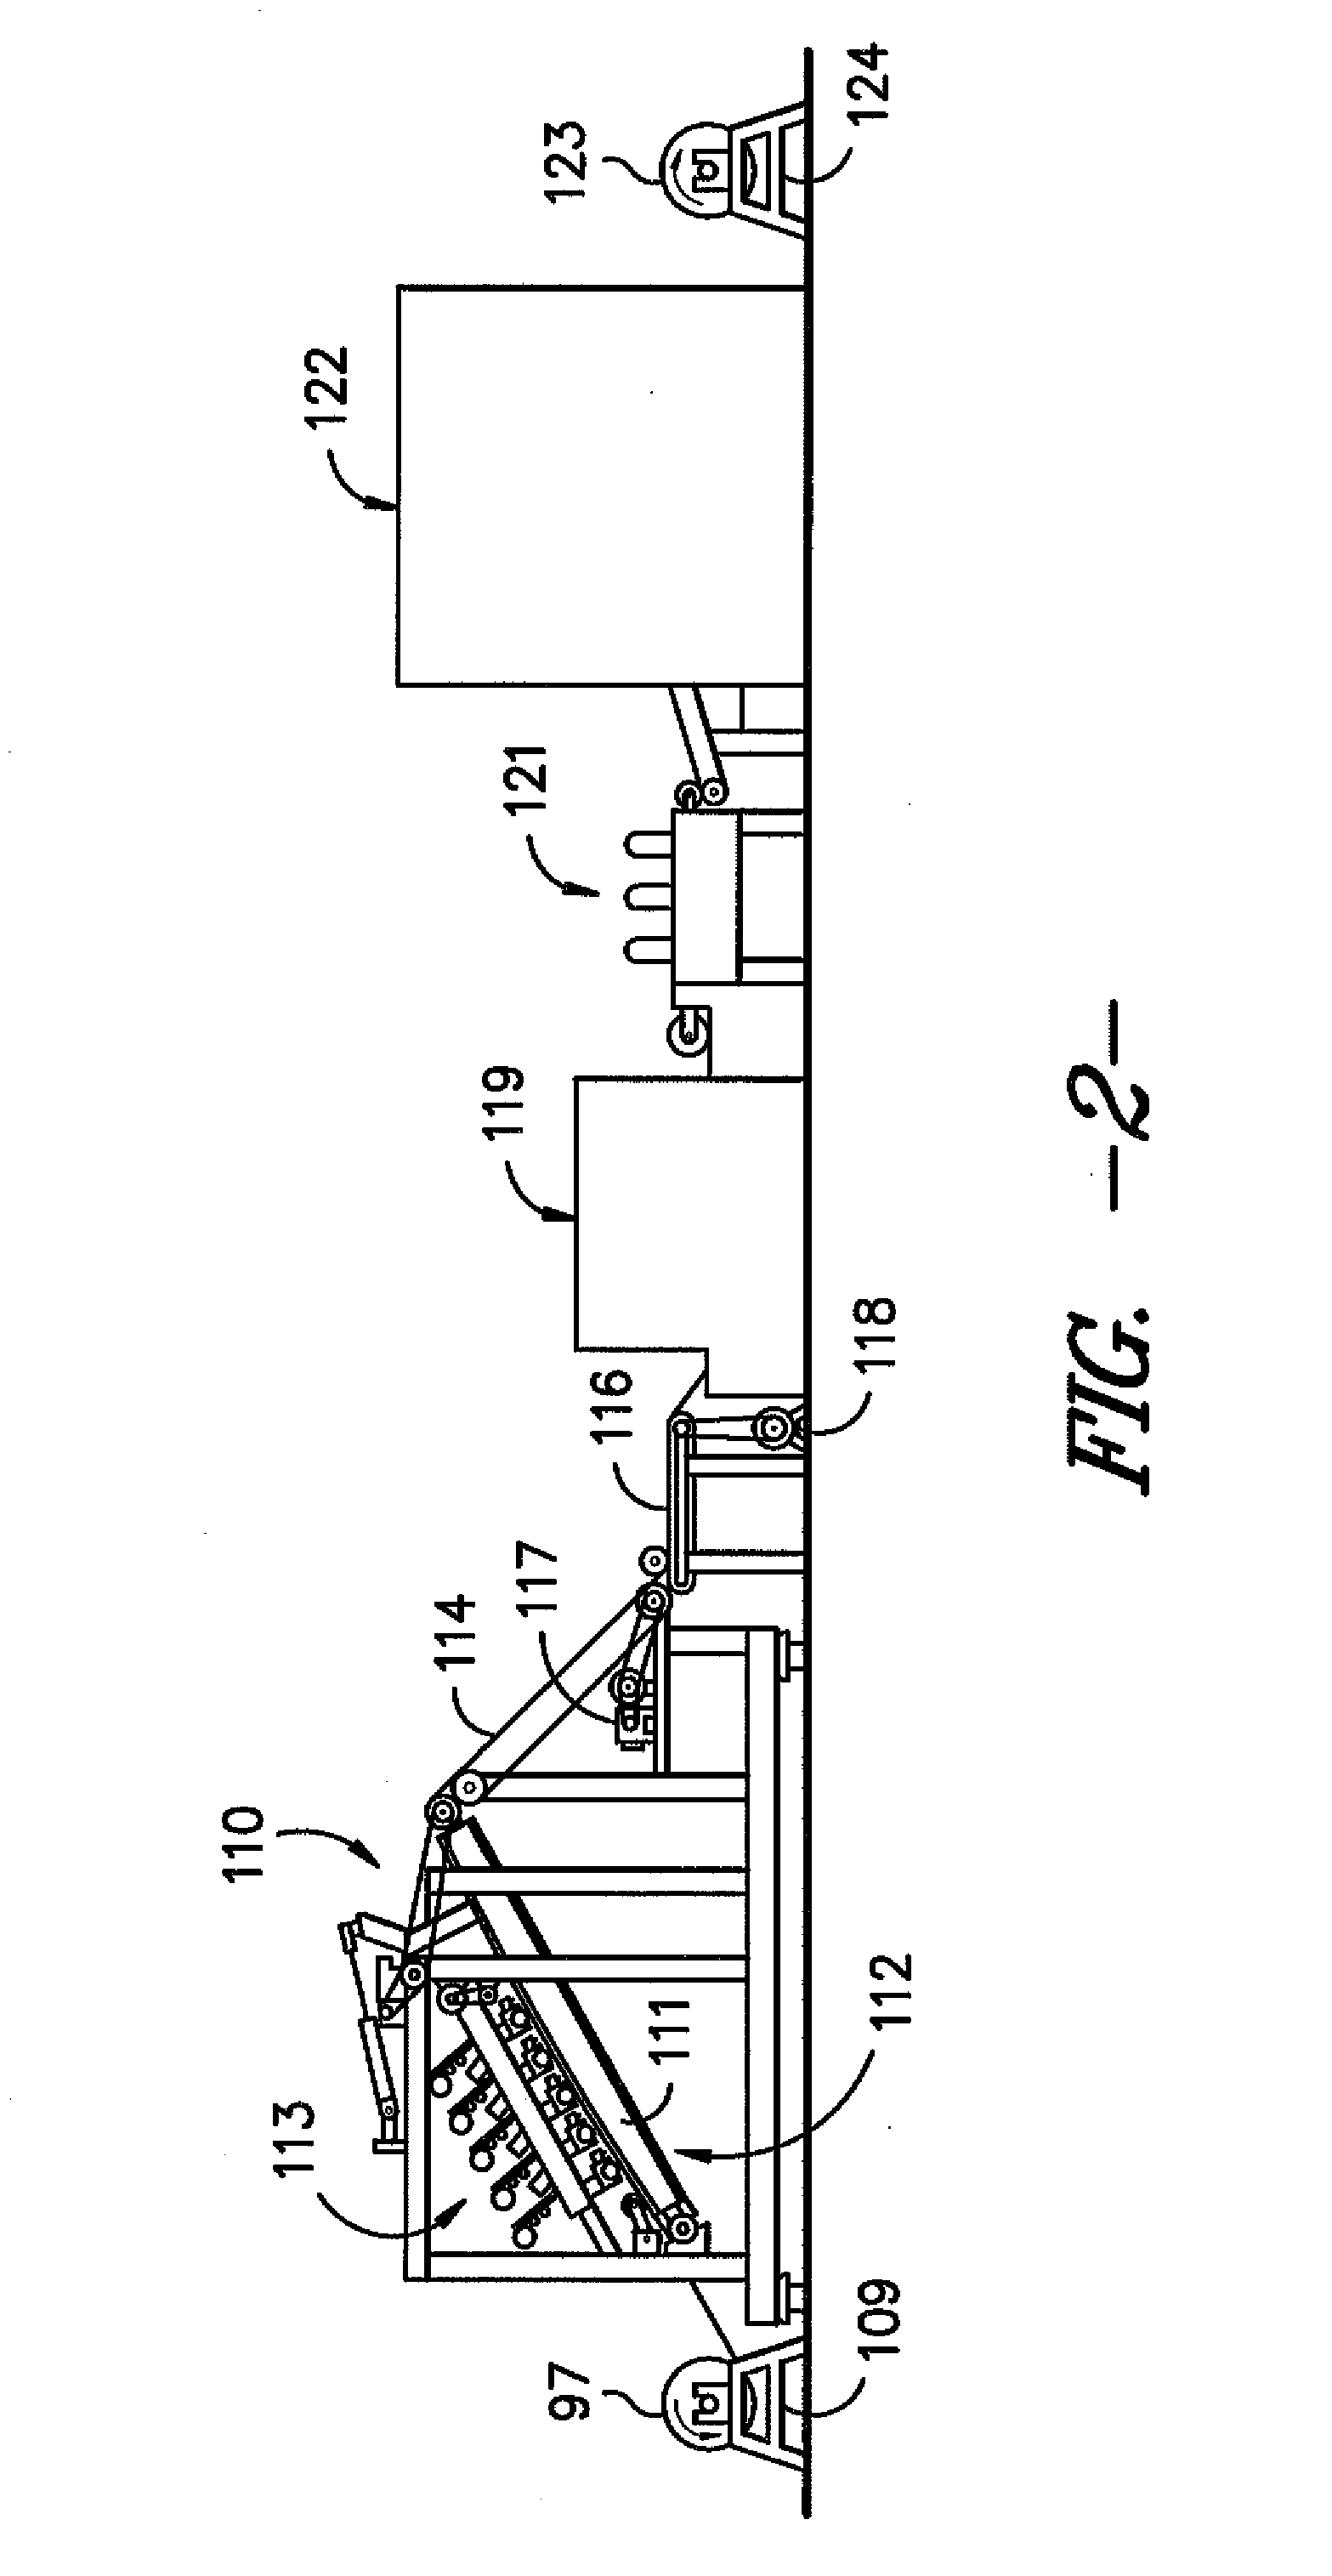 Printed Textile Substrate and Process for Making